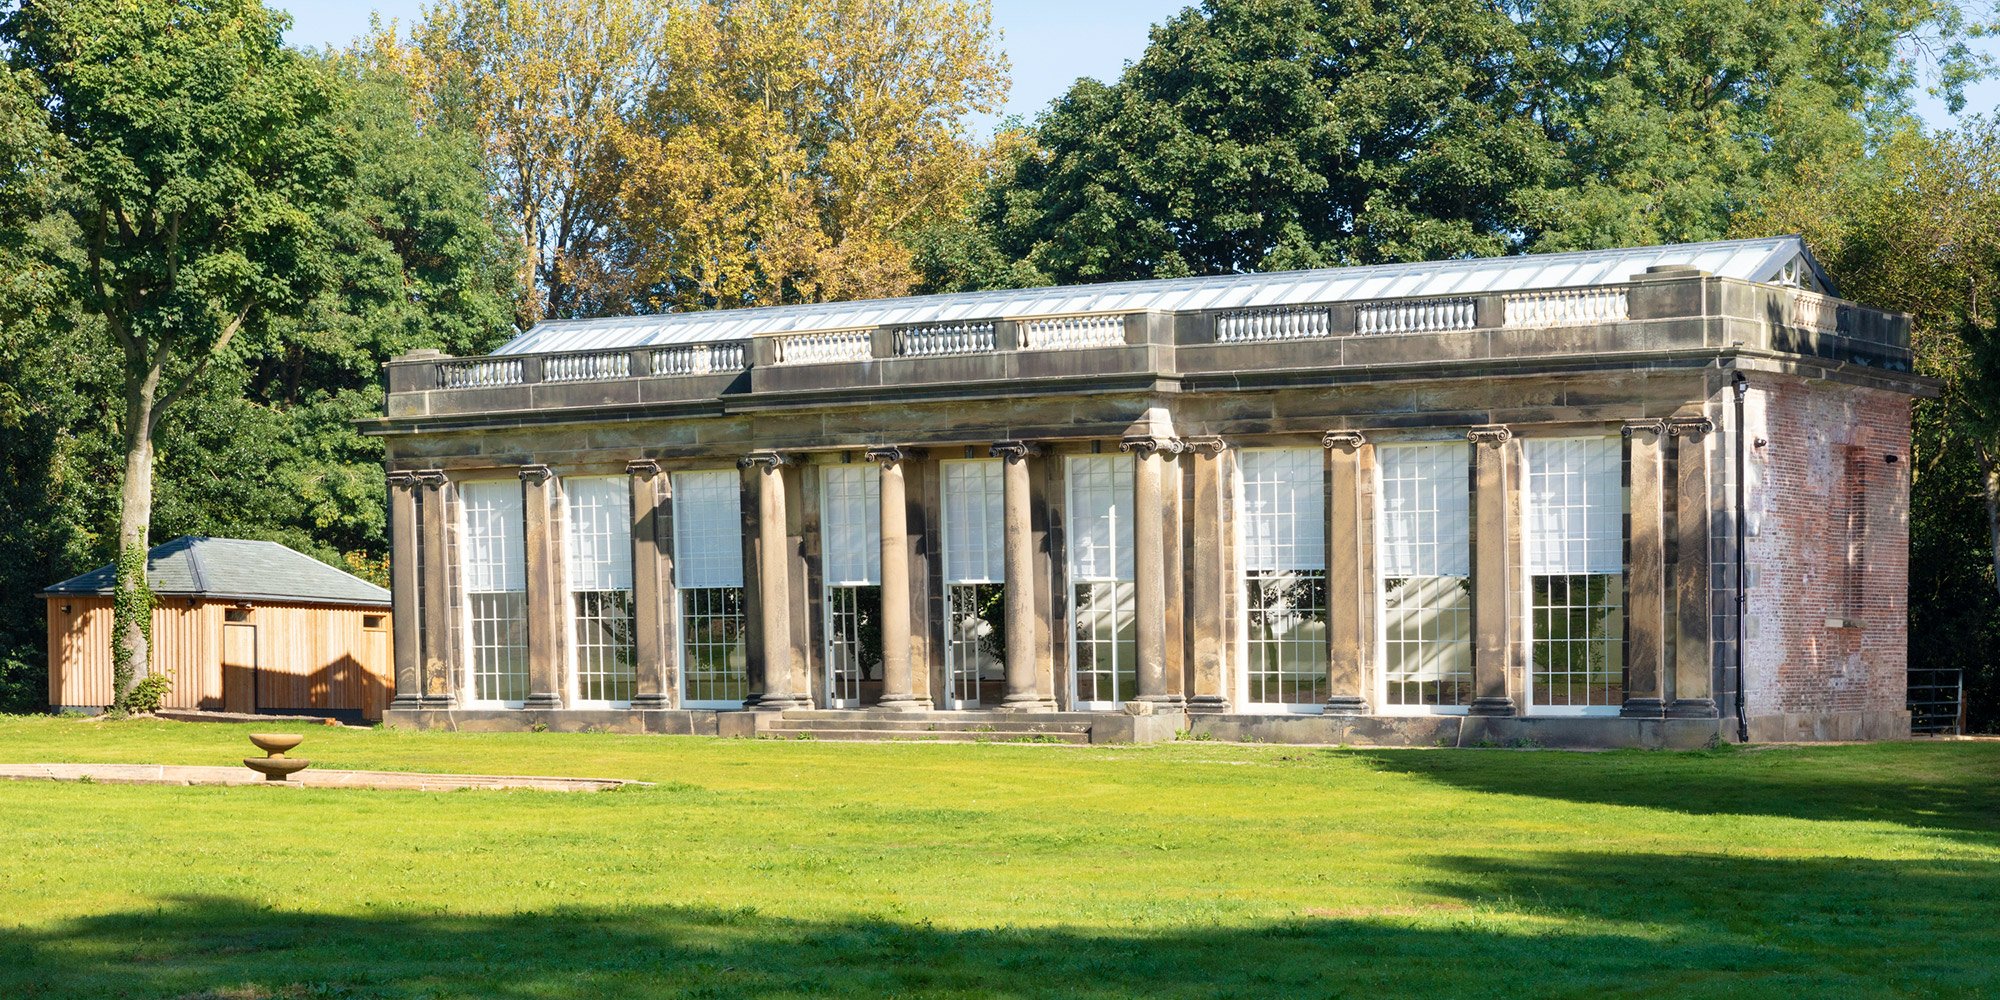 Exterior photo of a large formal botanical building with columns and tall windows. Lawns in front and trees beyond.